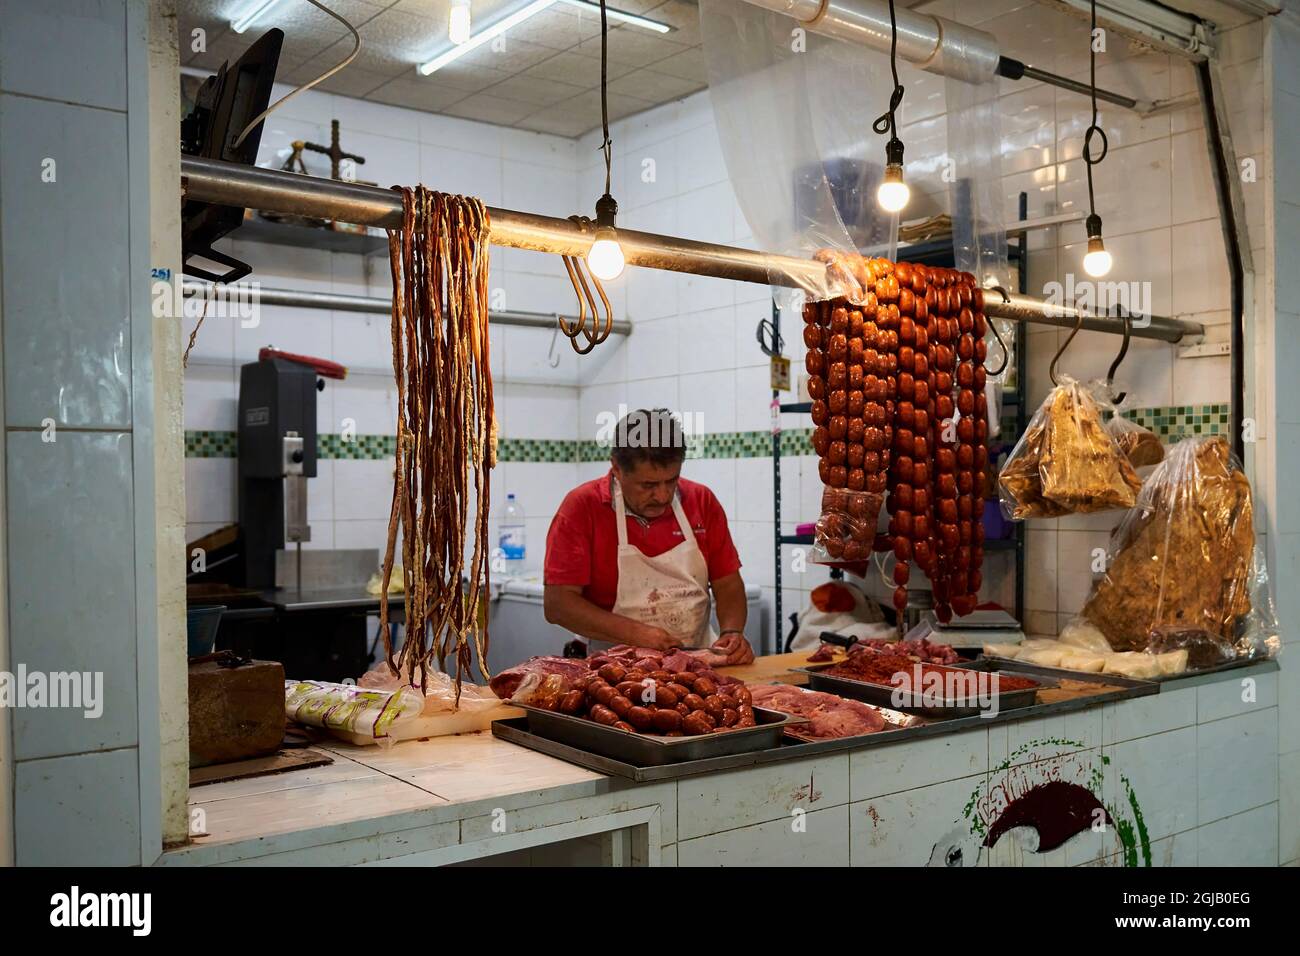 Mexico, Oaxaca. Benito Juarez Market. Several hundred stalls offer food, clothing, mezcal, handicrafts and souvenirs. A butcher fillets his product. Stock Photo